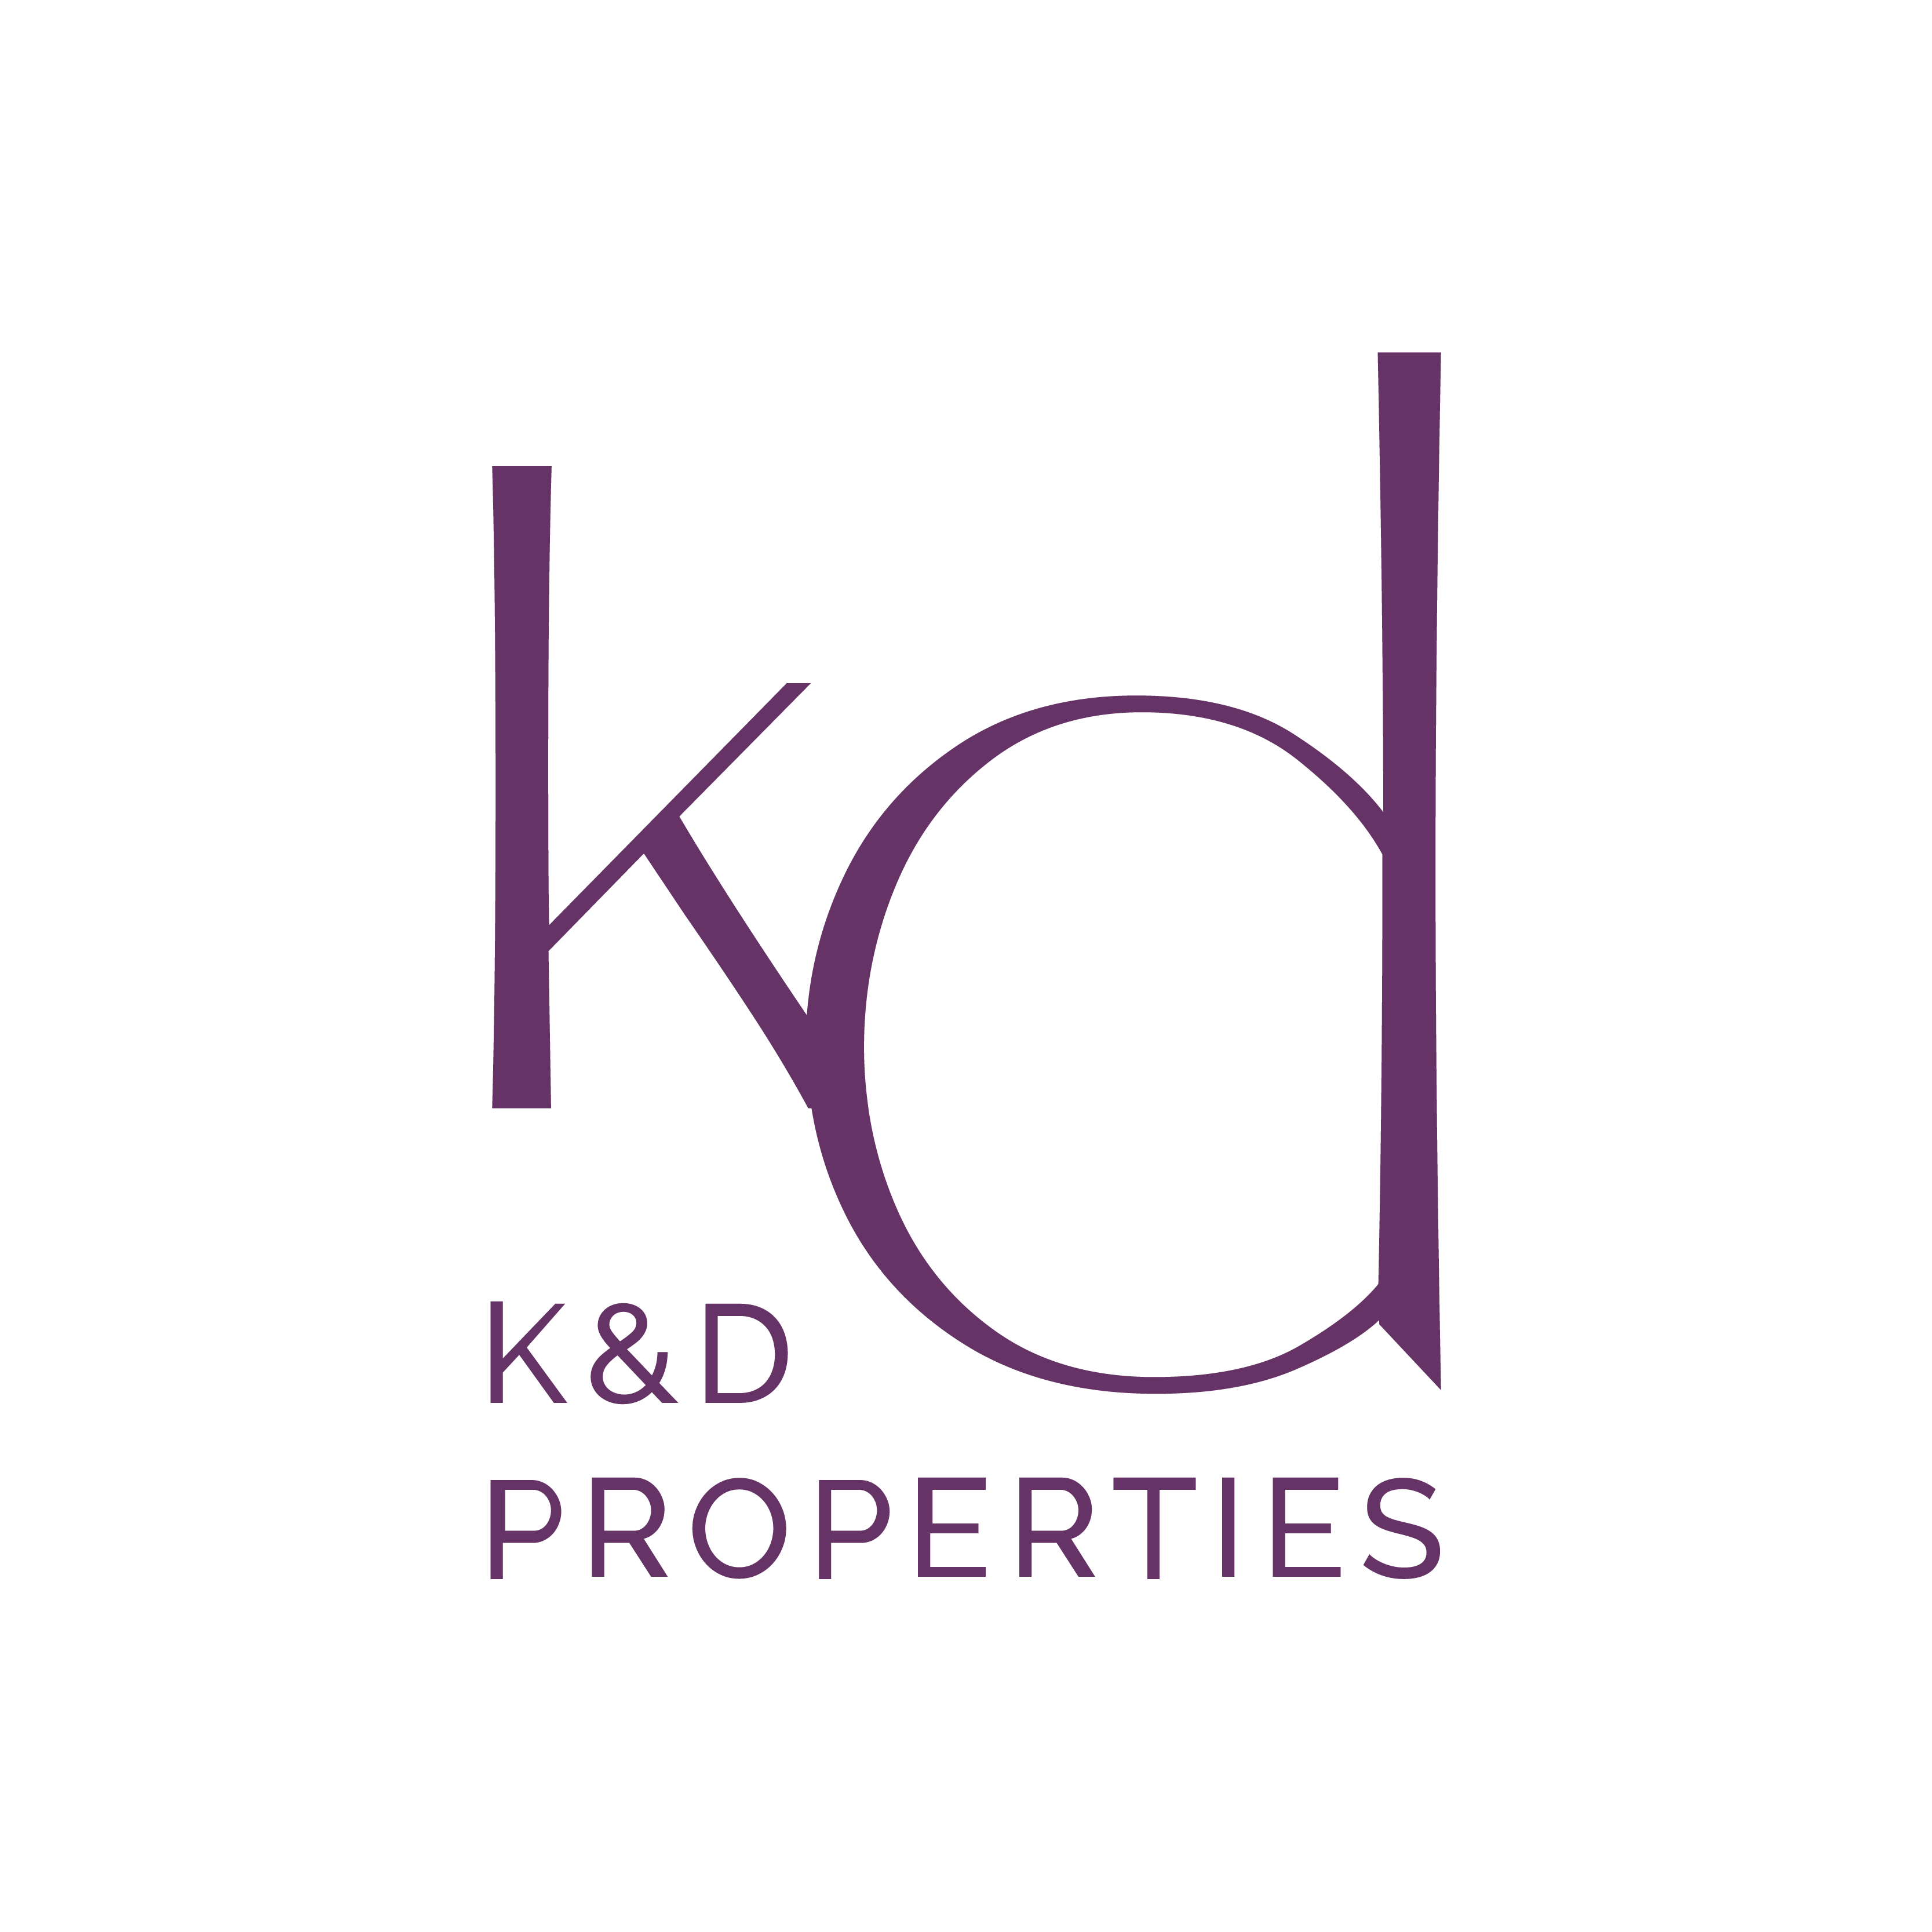 K & D Properties – Your trusted real estate agent in Brisbane